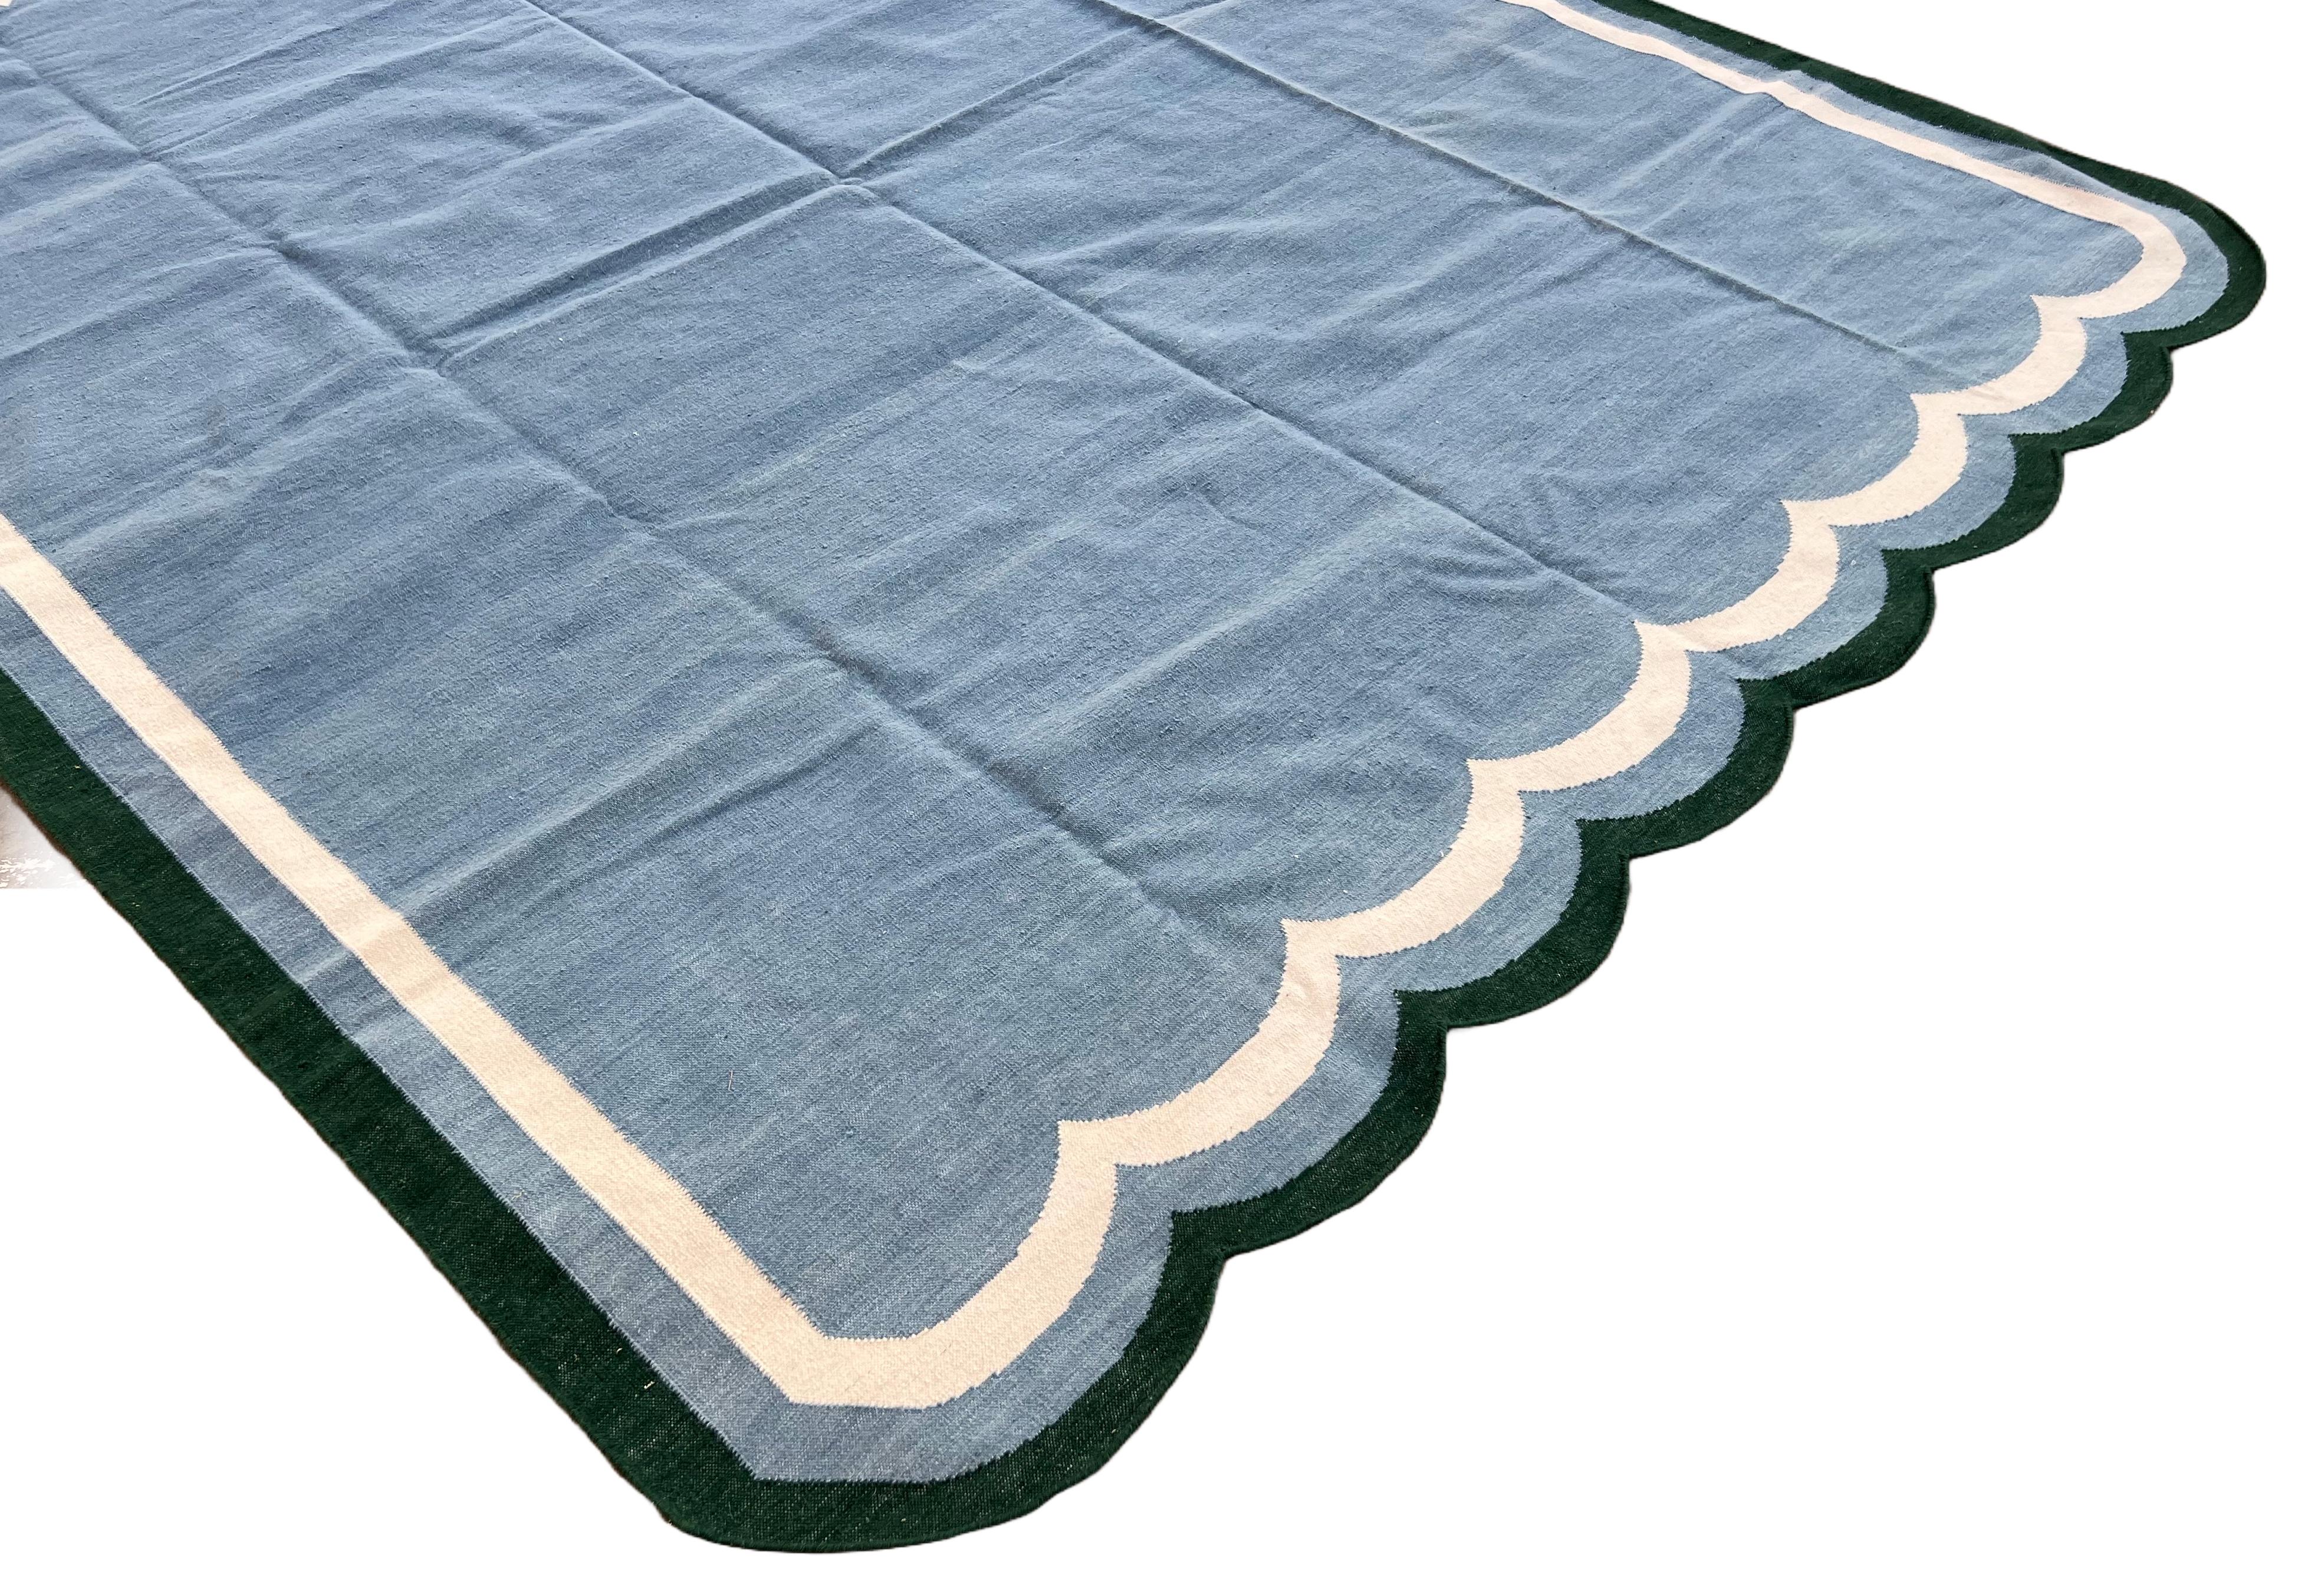 Handmade Woolen Area Flat Weave Rug, 8x10 Blue And Green Scallop Indian Dhurrie For Sale 4